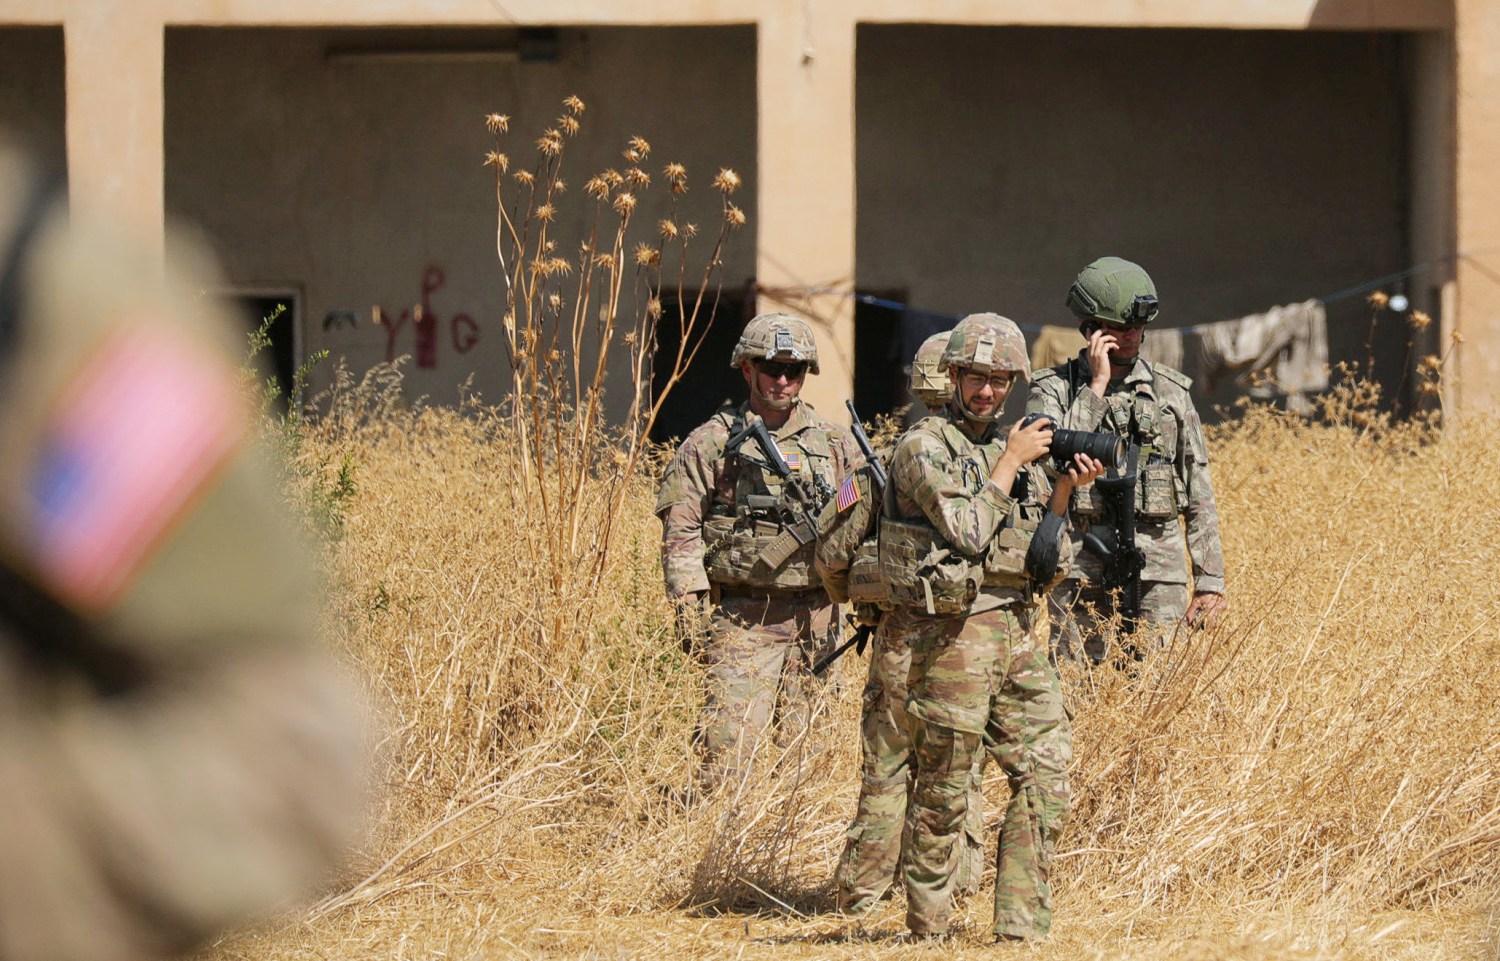 Turkish and American soldiers stand near a former YPG military point during a joint U.S.-Turkey patrol, near Tel Abyad, Syria September 8, 2019. REUTERS/Rodi Said